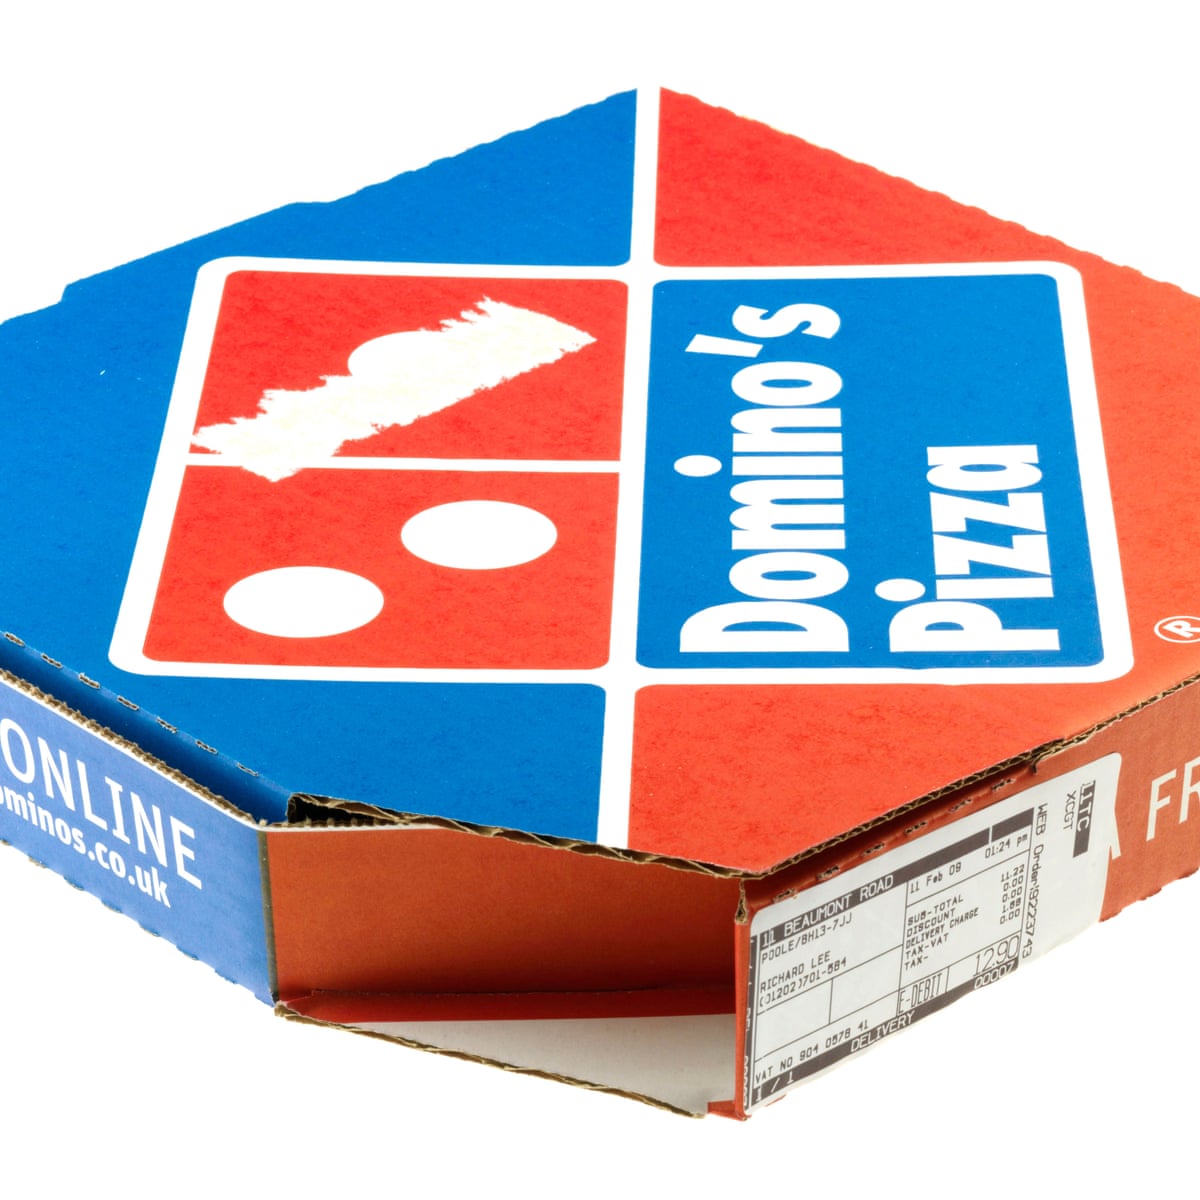 klem Ambient Ophef Keep the change: Domino's offers $3 tips if you pick up your pizza yourself  | Domino's Pizza | The Guardian